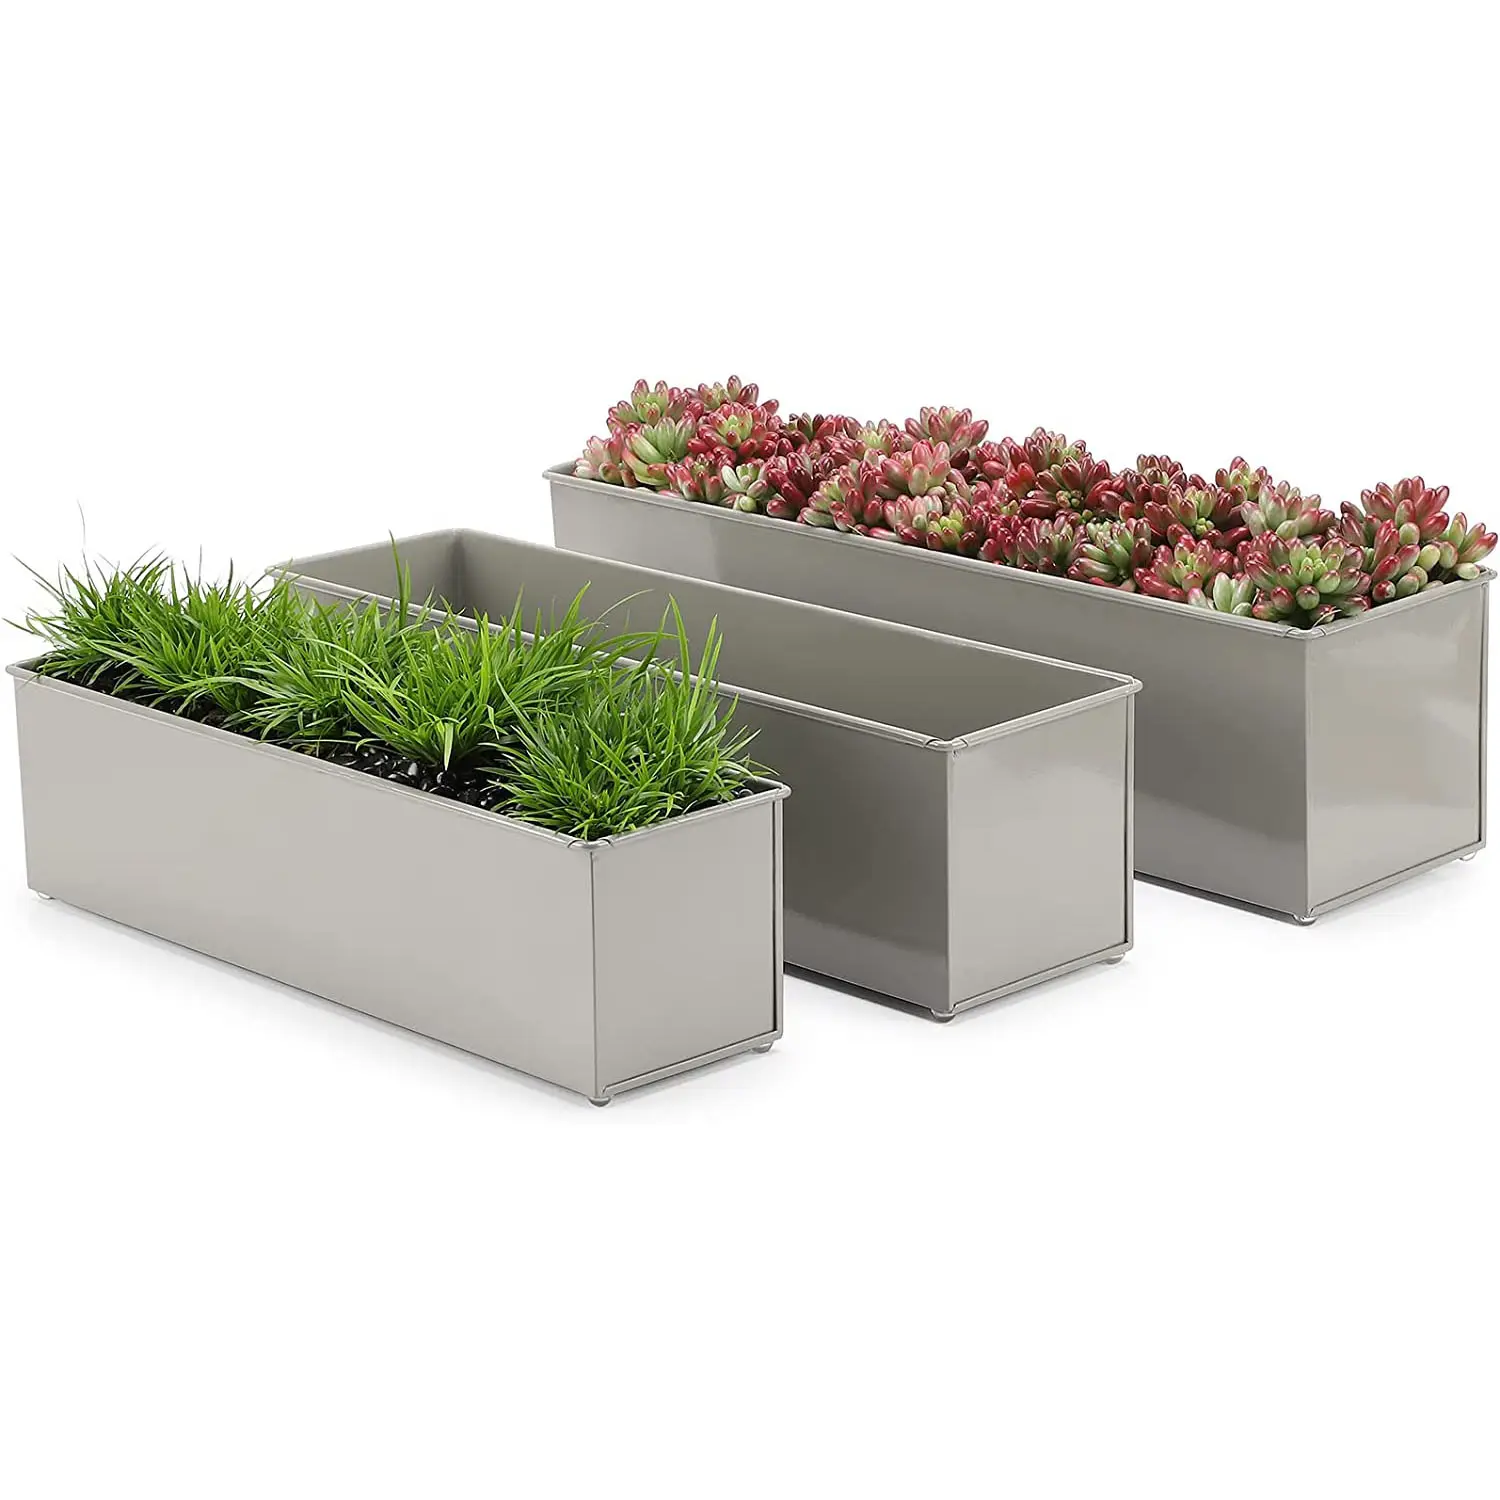 Flower Baskets and Planters Garden Cup and Saucer Planter Modular Planter Boxes Free Samples Metal Steel Carton Box Europe T/T